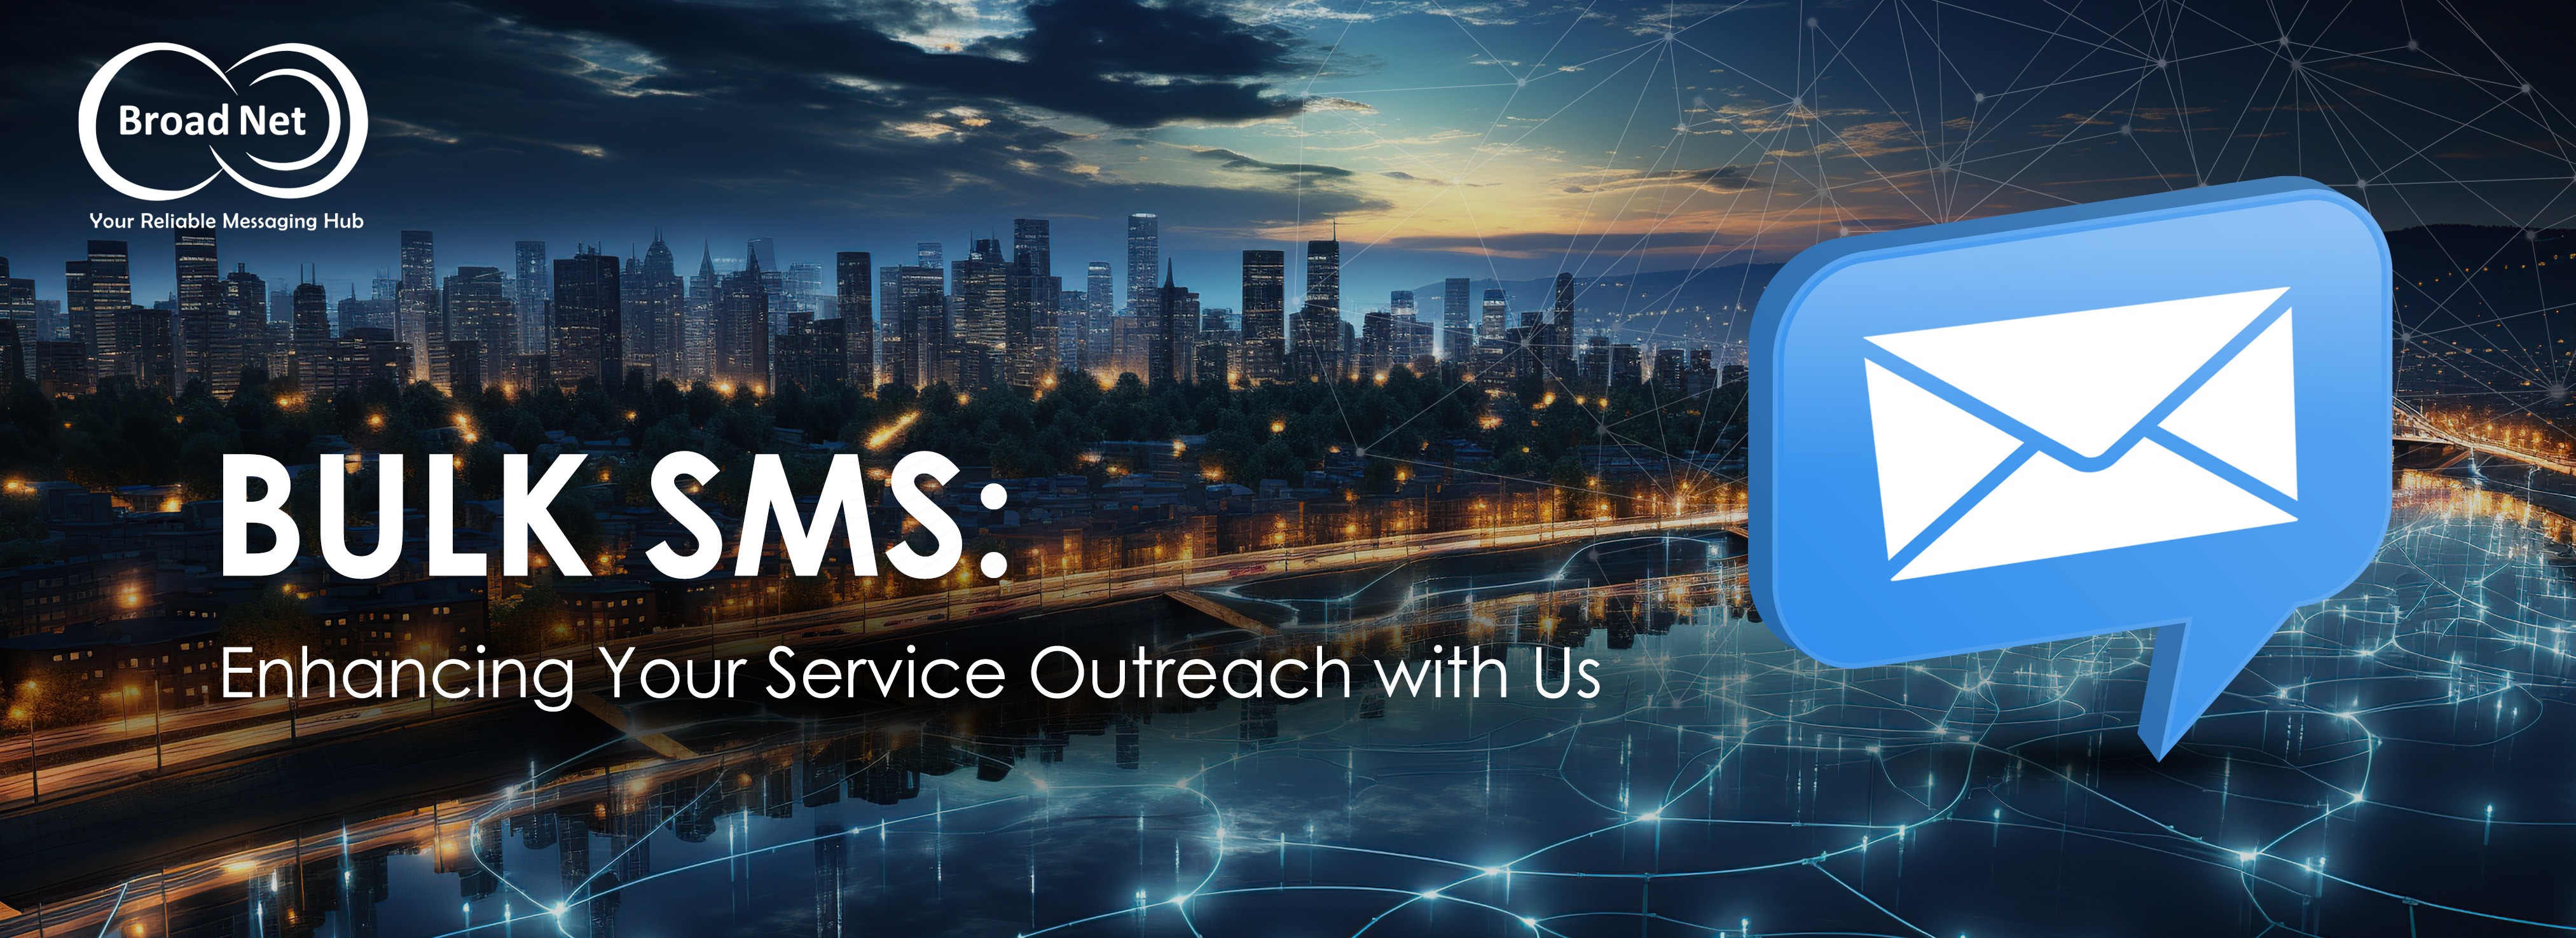 Bulk SMS: Enhancing Your Service Outreach with Us